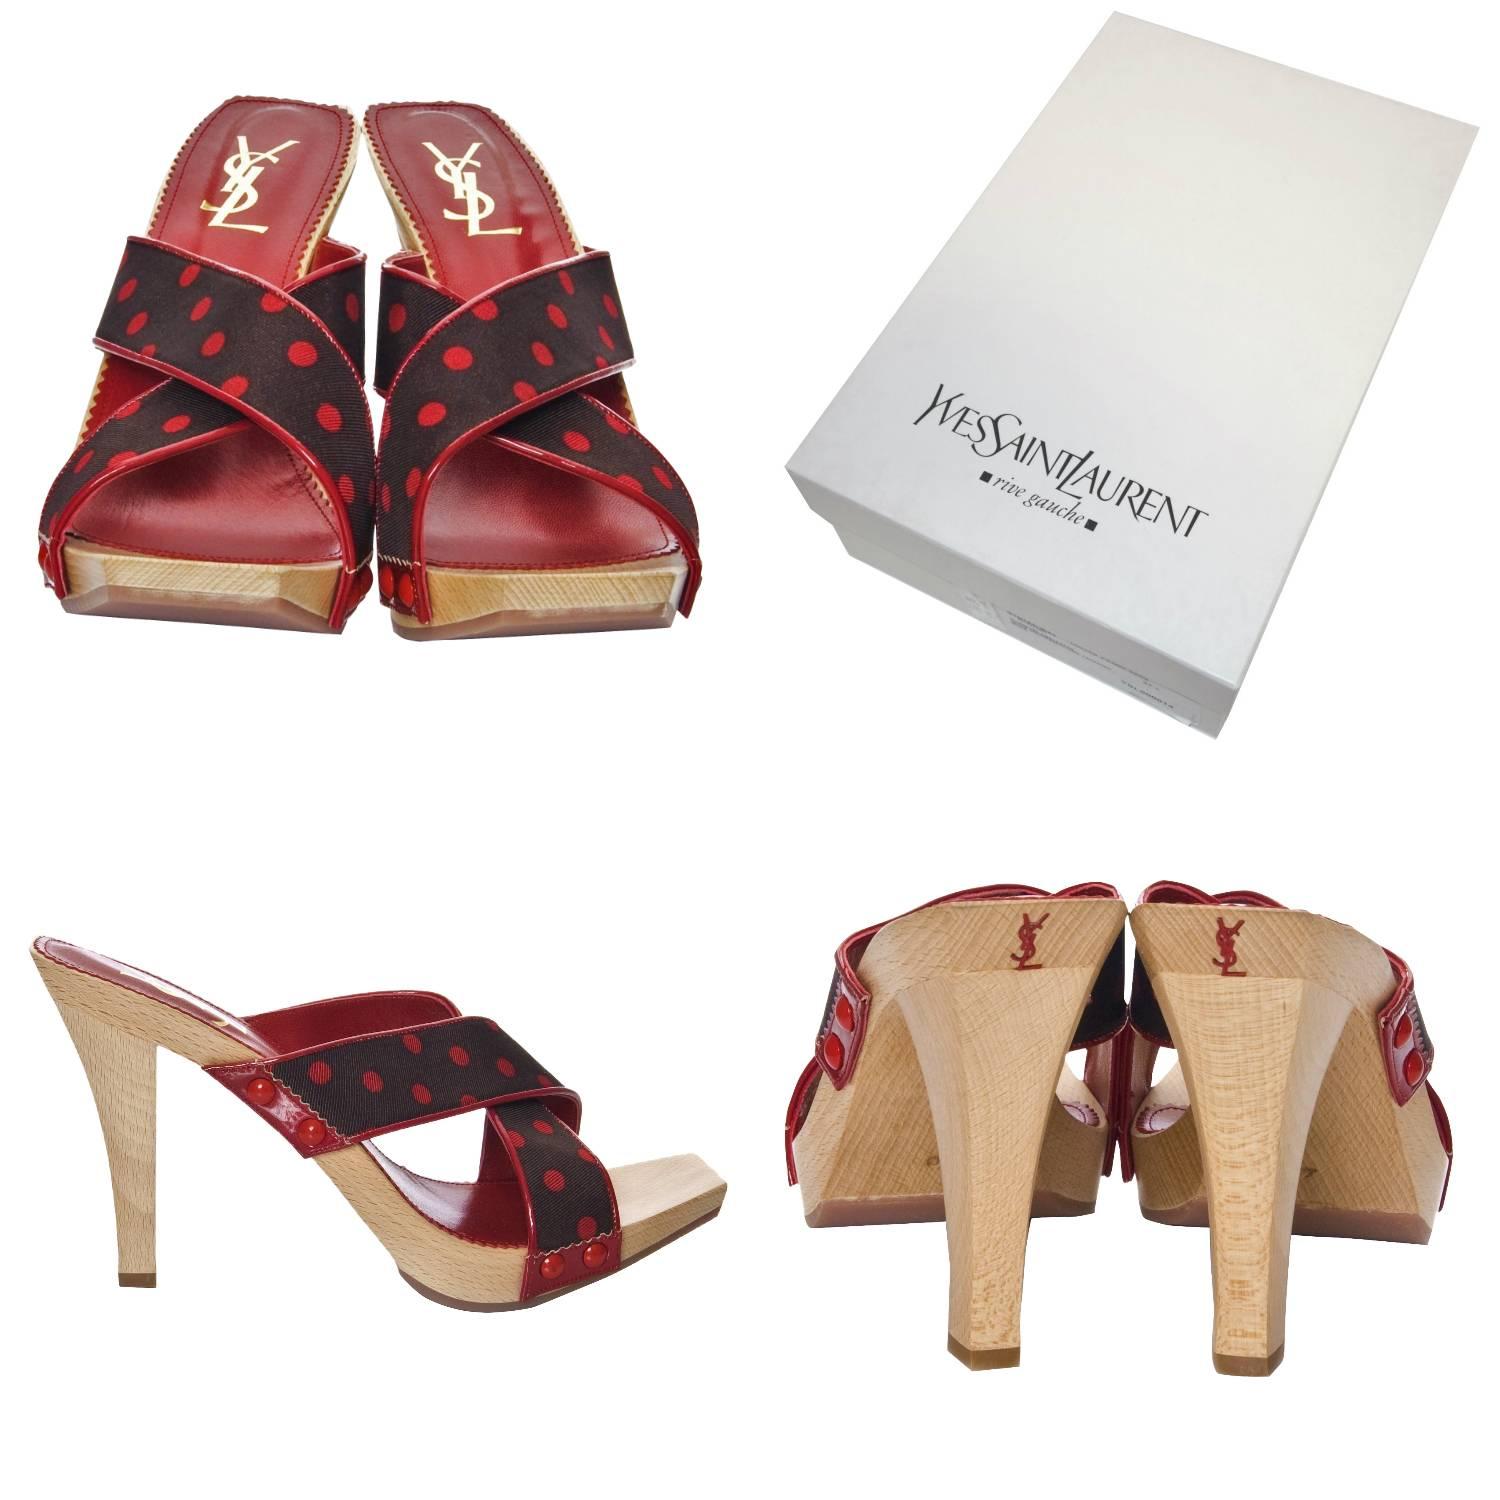 Yves Saint Laurent Heels
Brand New
* Tom Ford Era! This was his last collection for Yves Saint Laurent. He was inspired by the Chinese Collection of 1977 
* Stunning Red & Dark Chocolate Polka Dots
* Criss Cross Toe  
* Red Leather Footbed
* Slip